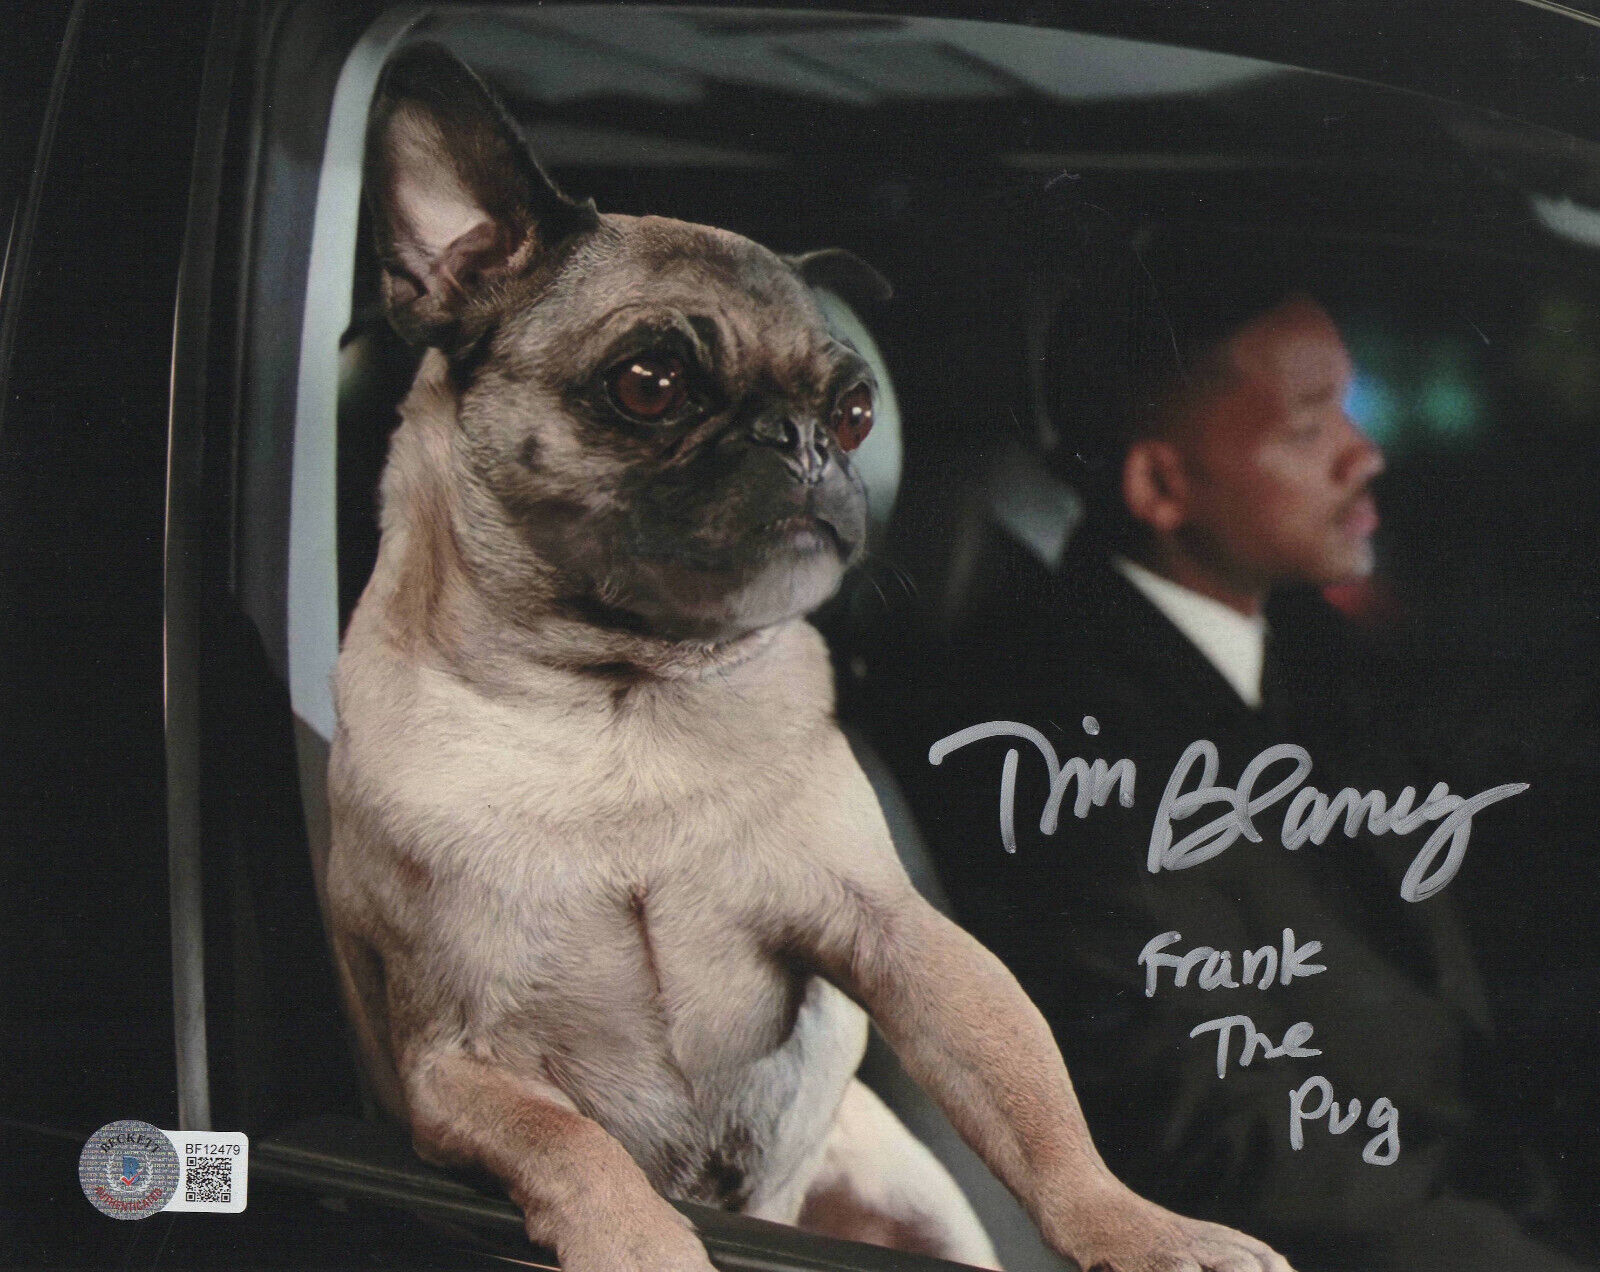 TIM BLANEY SIGNED AUTOGRAPH 8X10 MEN IN BLACK PHOTO BAS BECKETT FRANK THE PUG